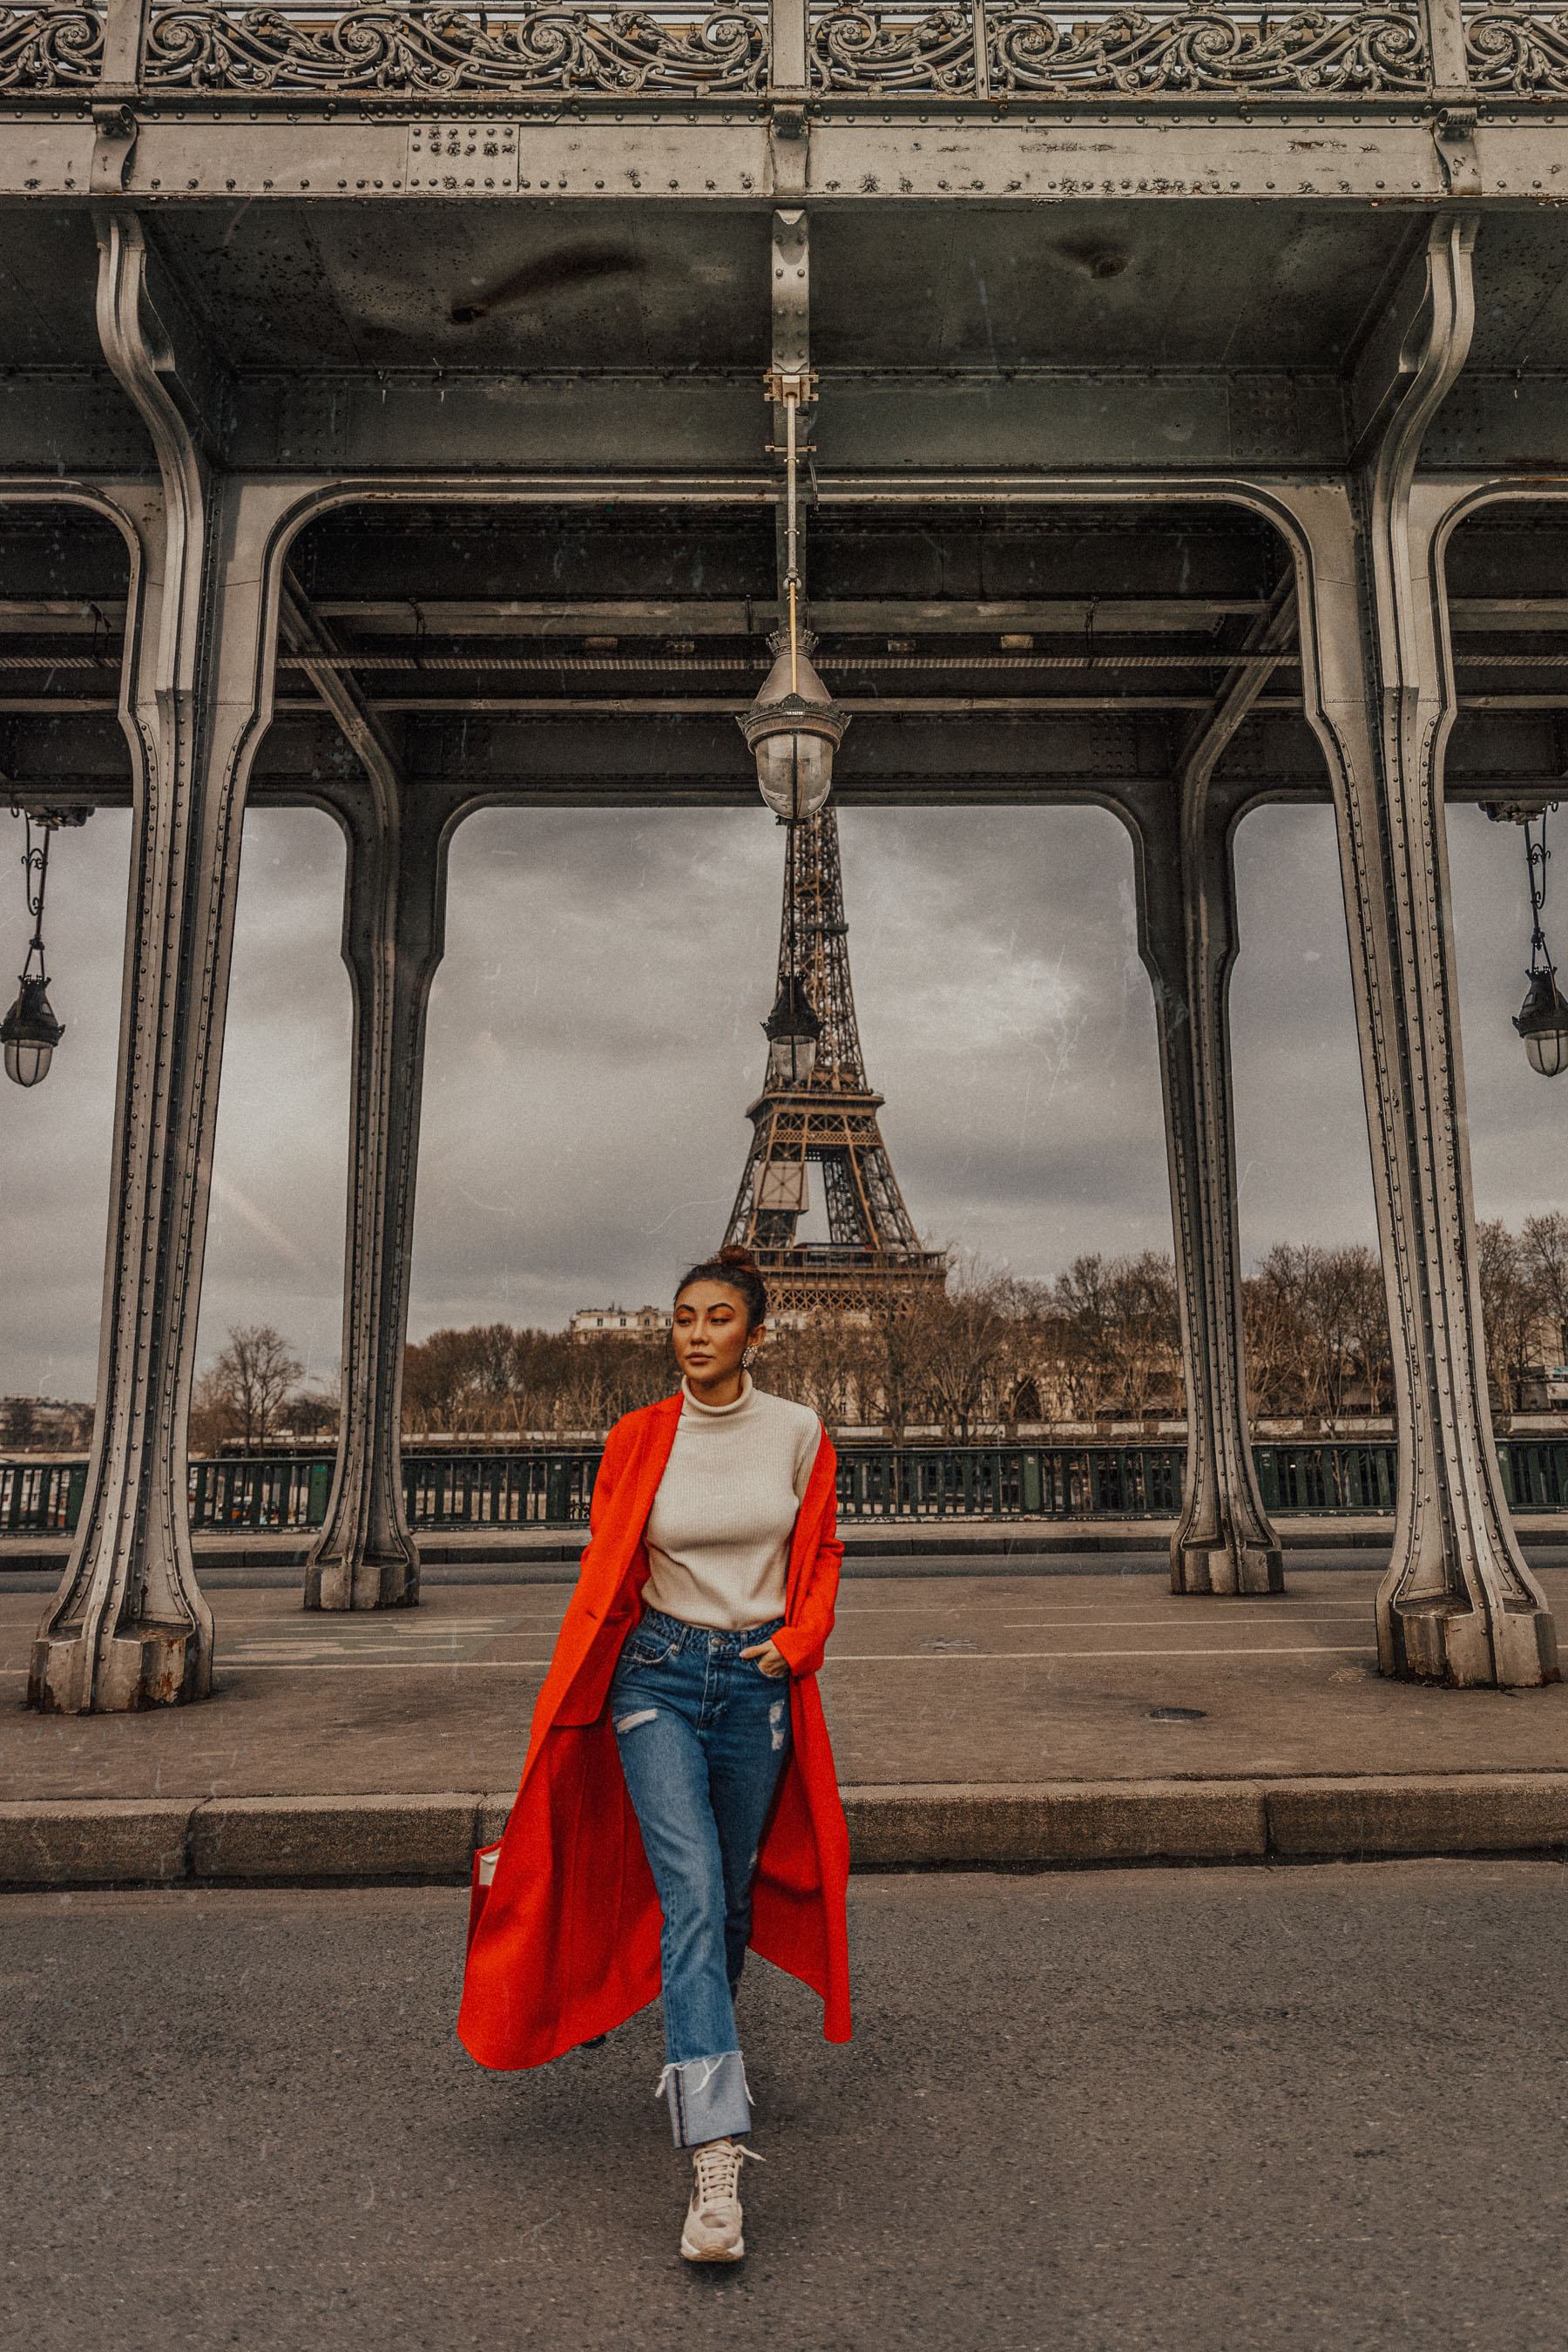 Winter Trends You Can Still Wear In Spring - Bright red coat, cuffed jeans, balenciaga bazar shopper, jessica wang in paris, pfw street style, chunky sneakers outfit, spring 2018 trends // Notjessfashion.com